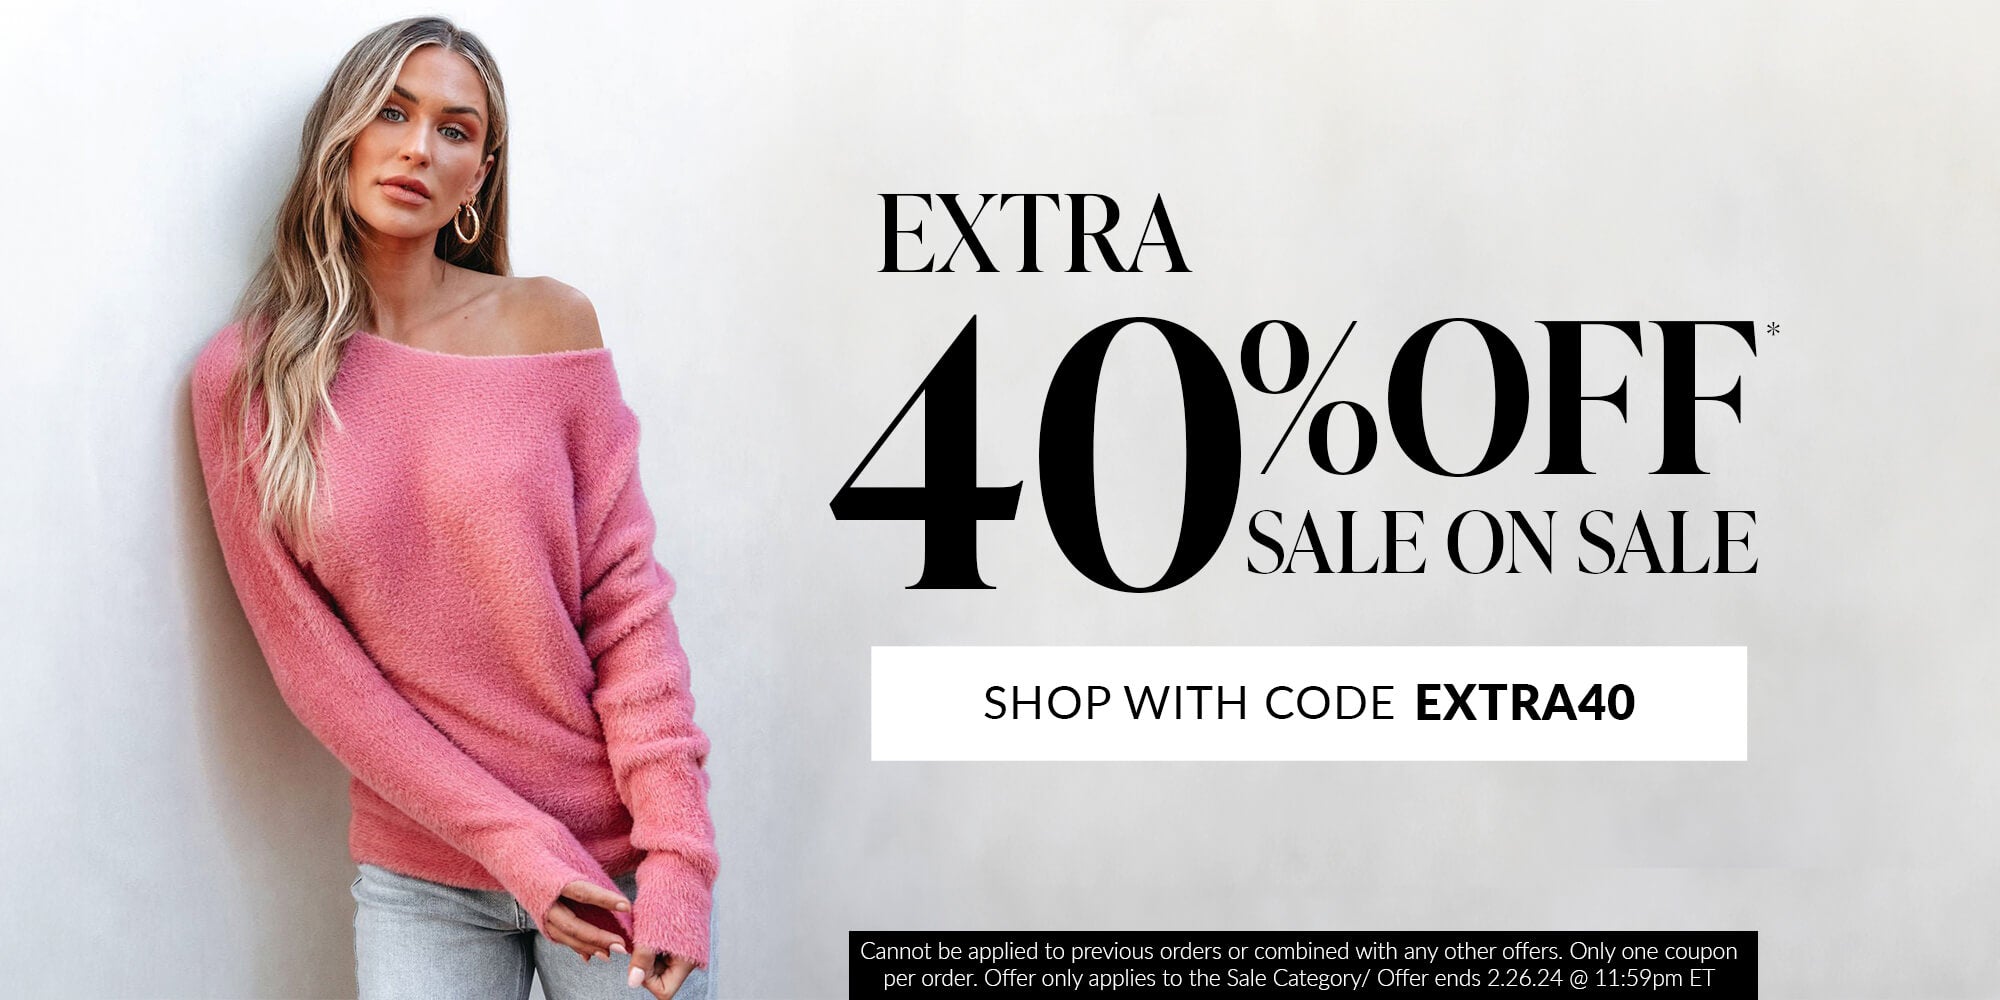 extra 40% off sale on sale shop with code EXTRA40 Cannot be applied to previous orders or combined with any other offers. Offer only applies to the Sale Category. Offer ends 2.26.24 @ 11:59pm ET.